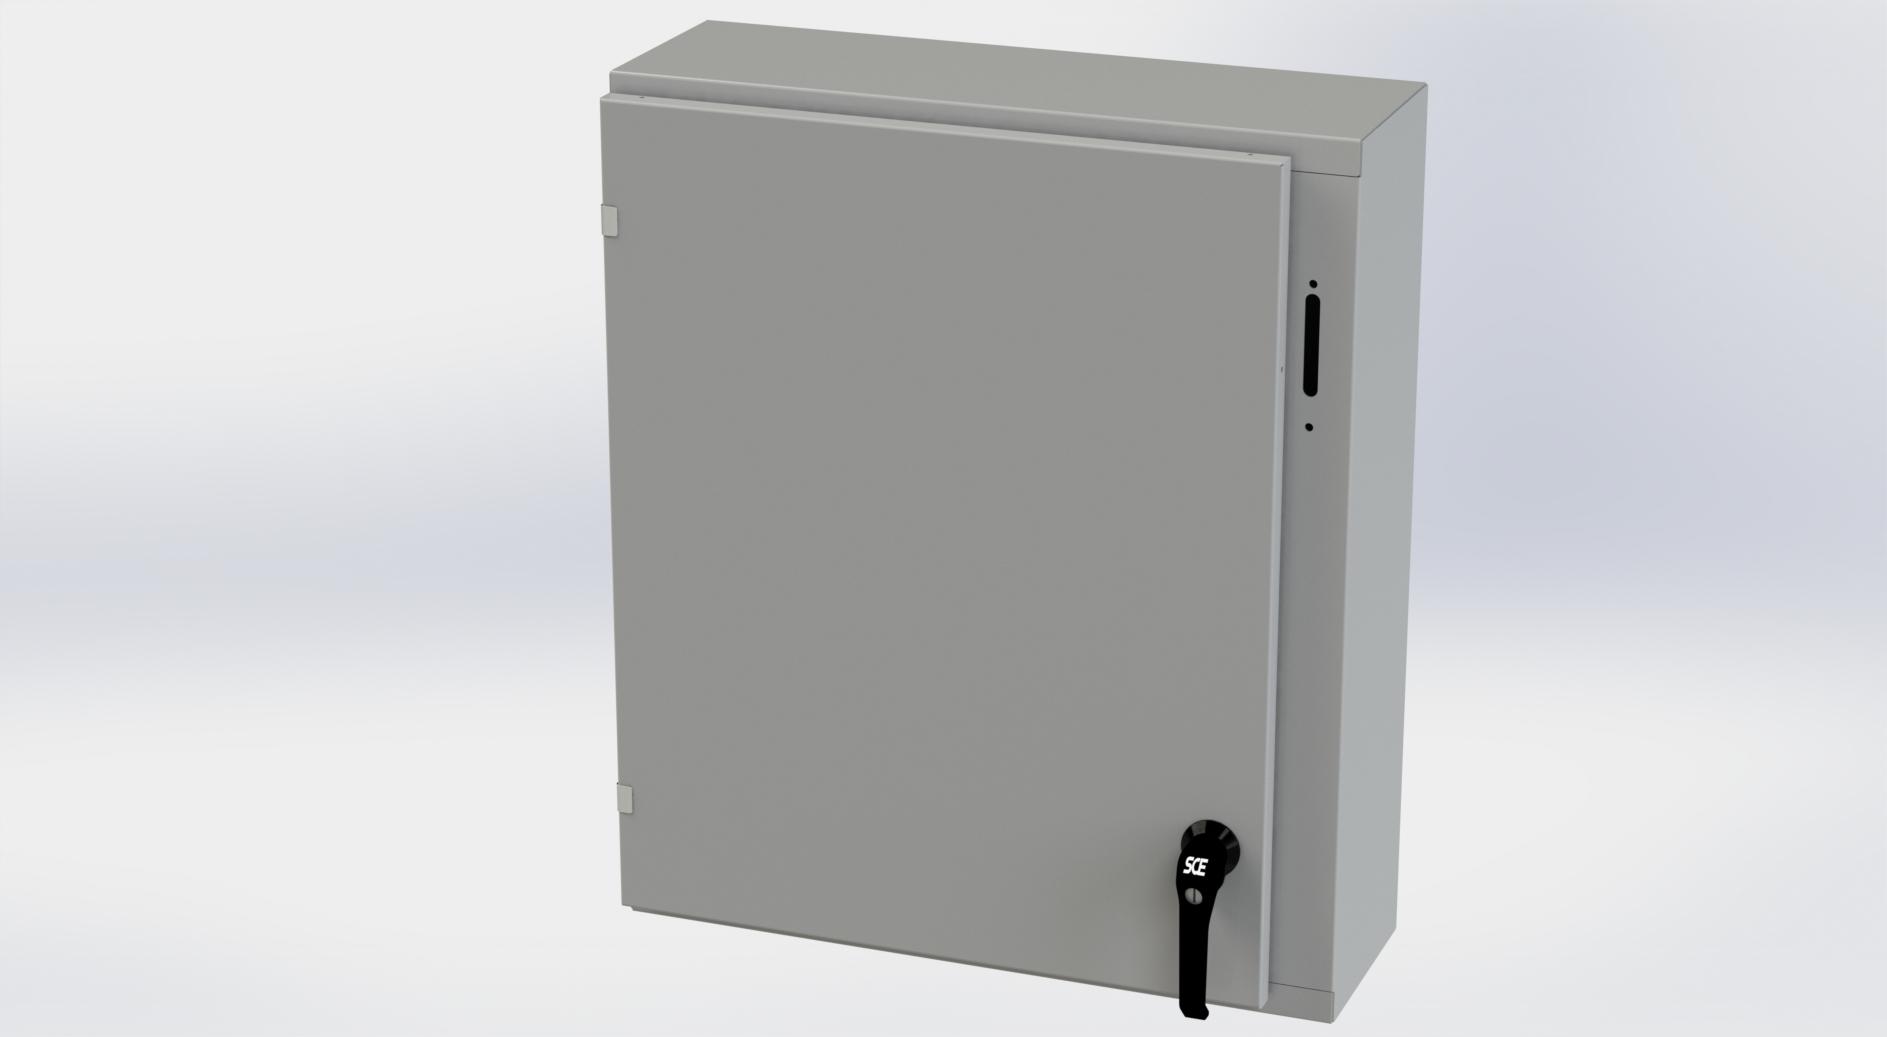 Saginaw Control SCE-30XEL2508LP XEL LP Enclosure, Height:30.00", Width:25.38", Depth:8.00", ANSI-61 gray powder coating inside and out. Optional sub-panels are powder coated white.